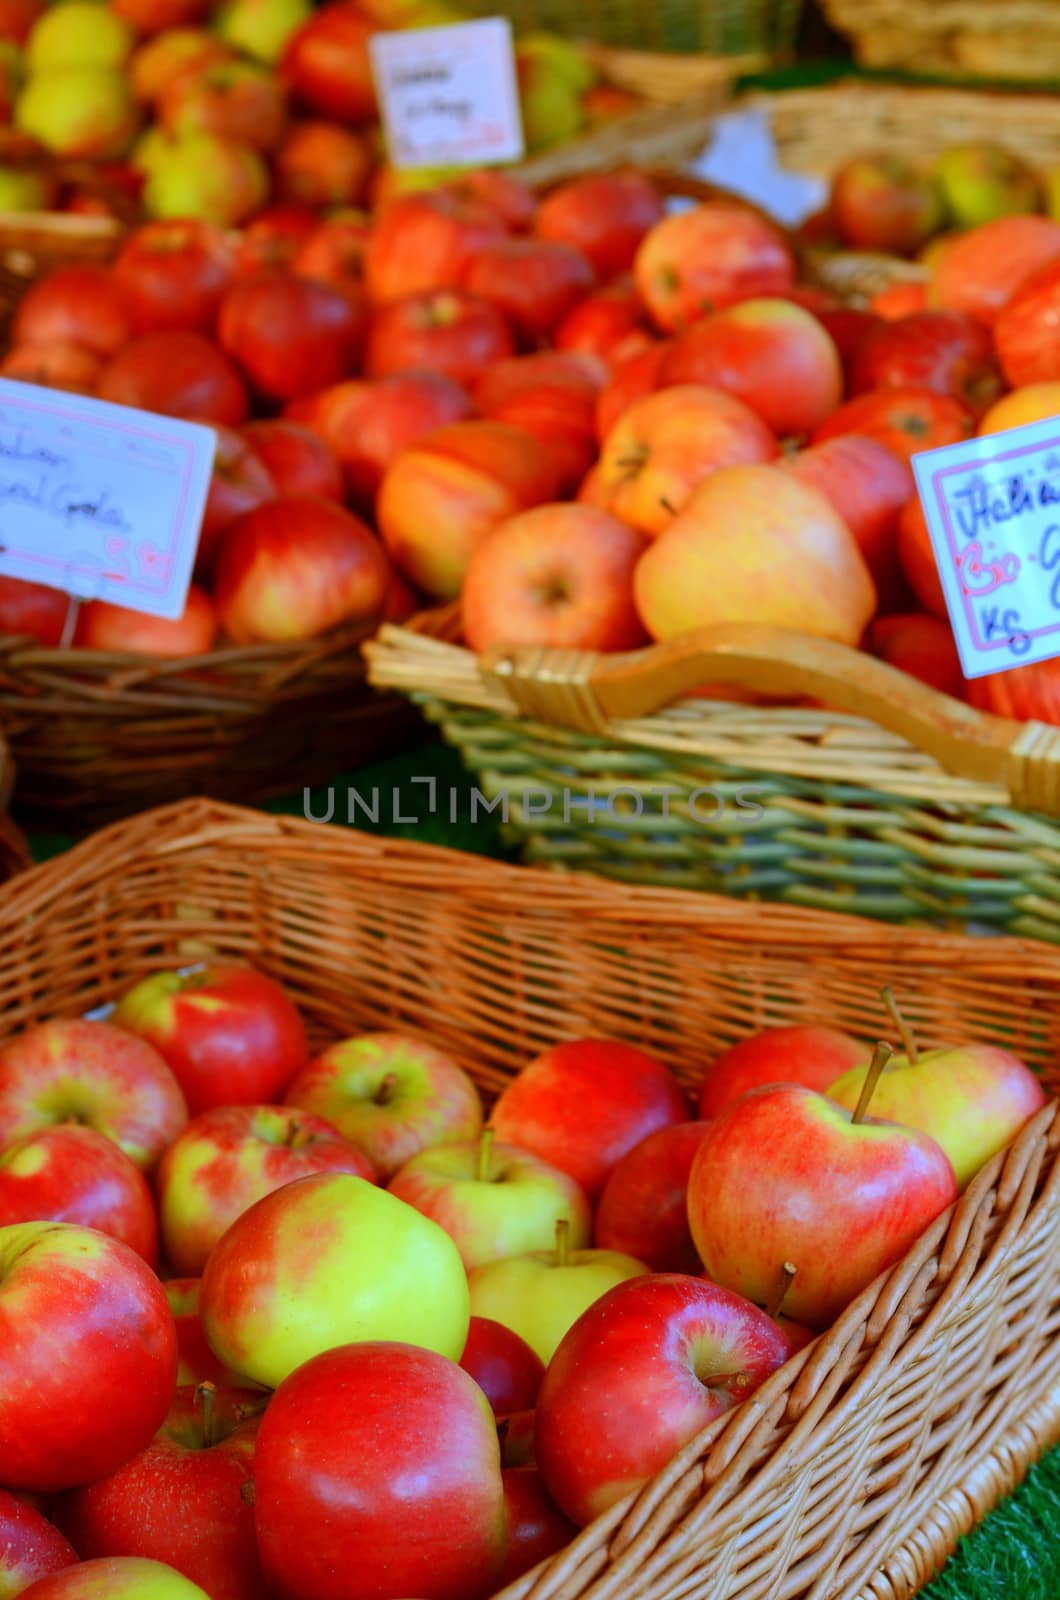 Apples At Market by mrdoomits